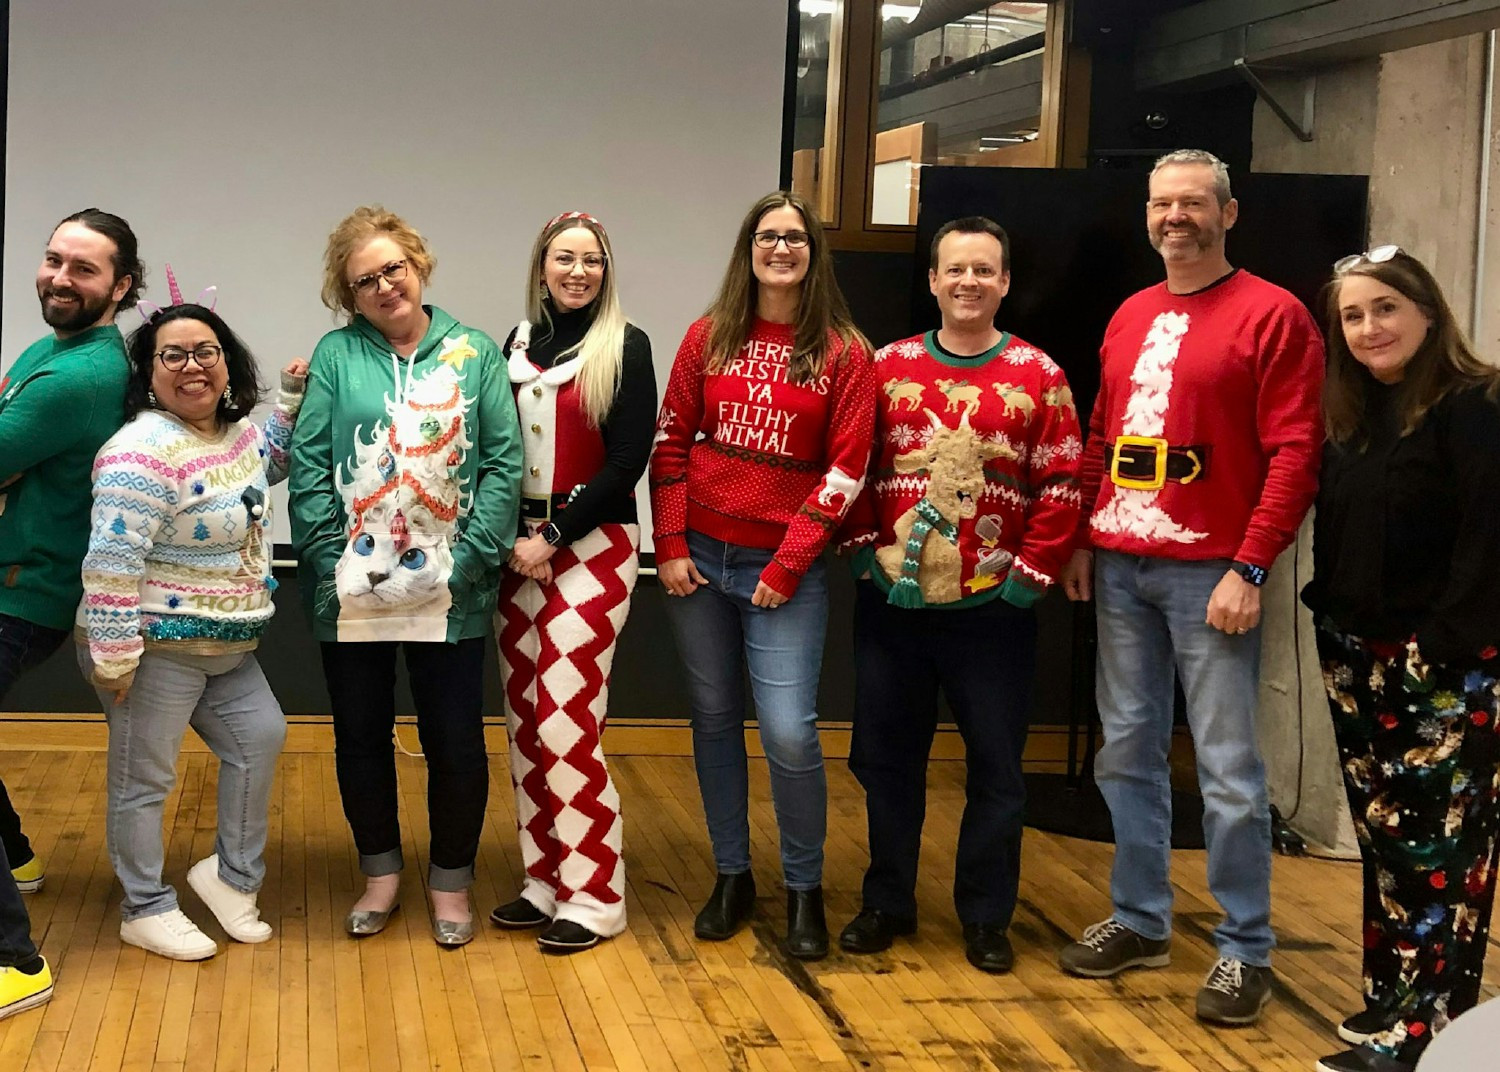 A snapshot of camaraderie and the commitment to making TPG great, one ugly sweater—and one successful project—at a time.